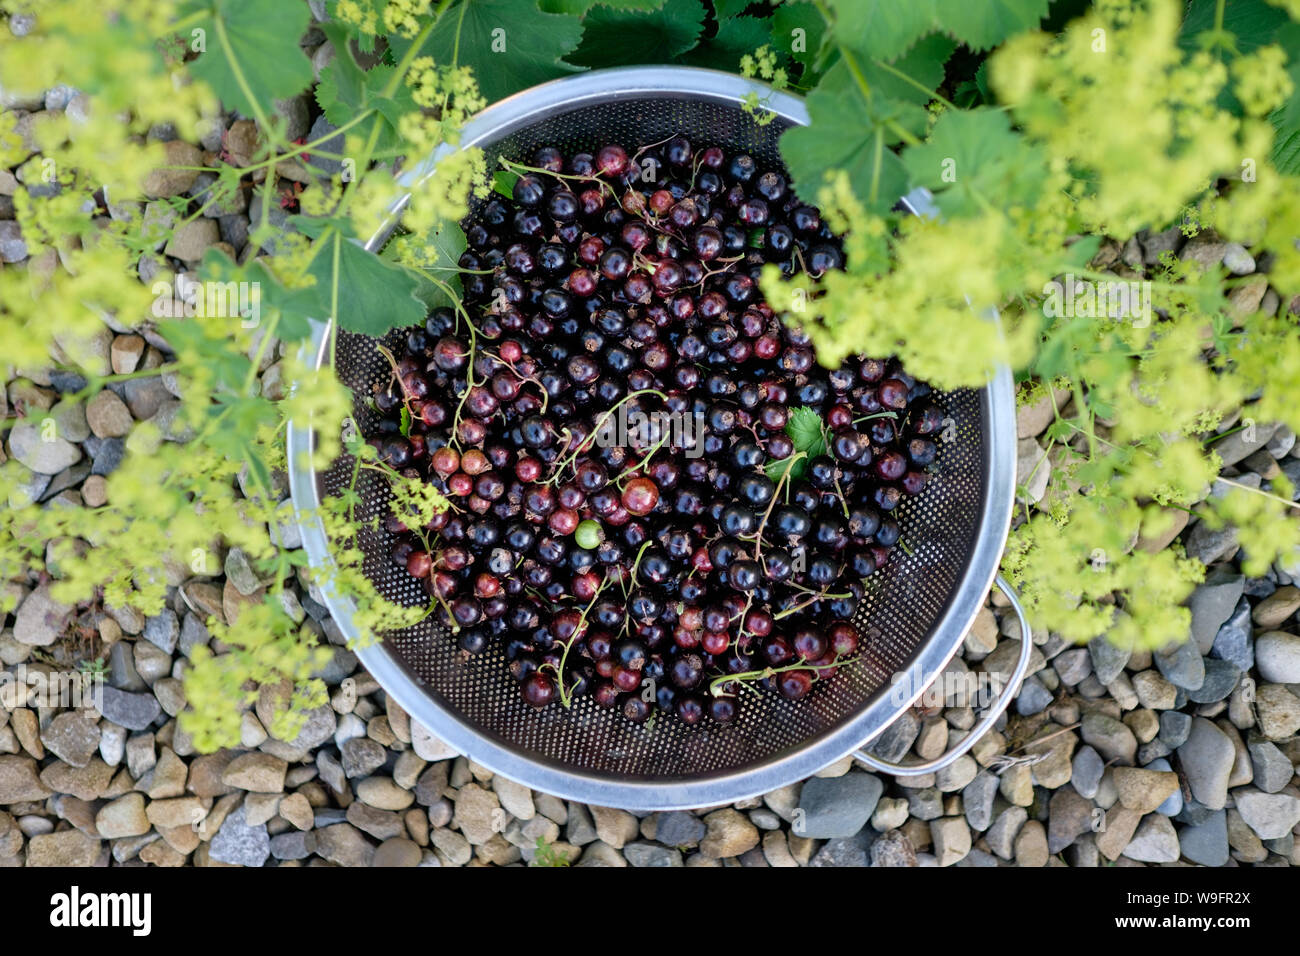 Looking down at a colander of freshly harvested black currants set among ladies mantle flowers. Stock Photo